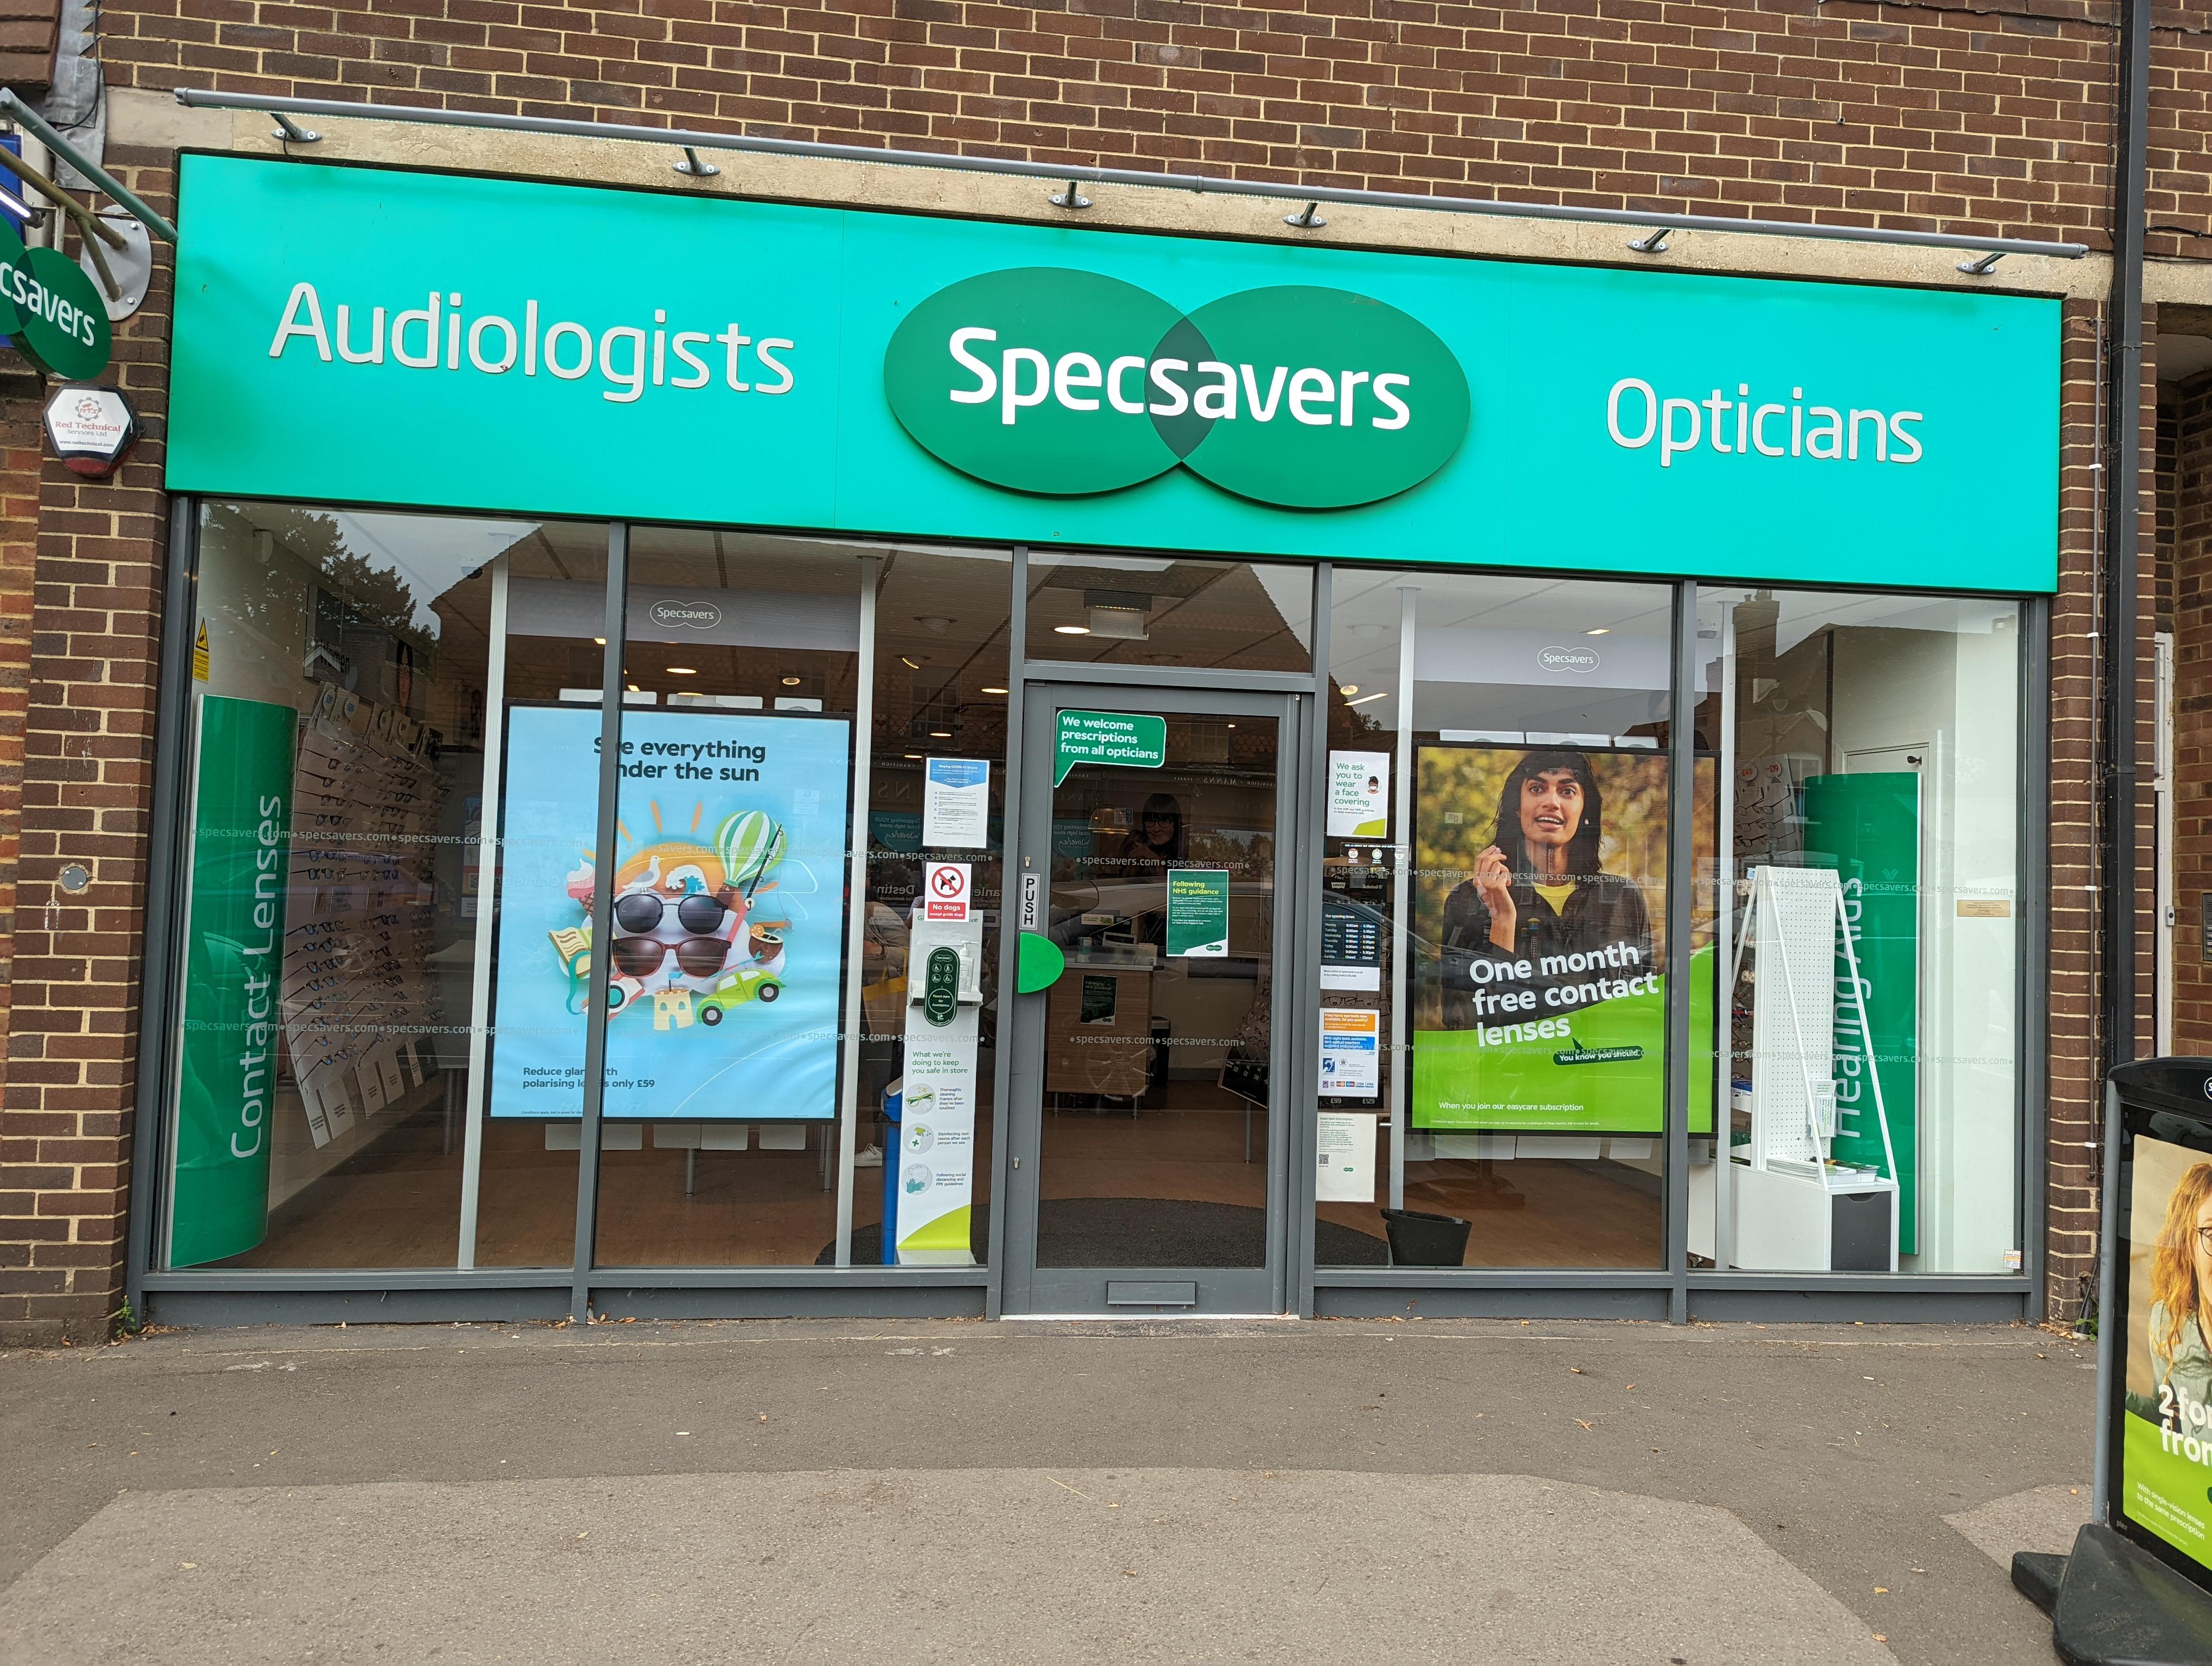 Images Specsavers Opticians and Audiologists - Cranleigh